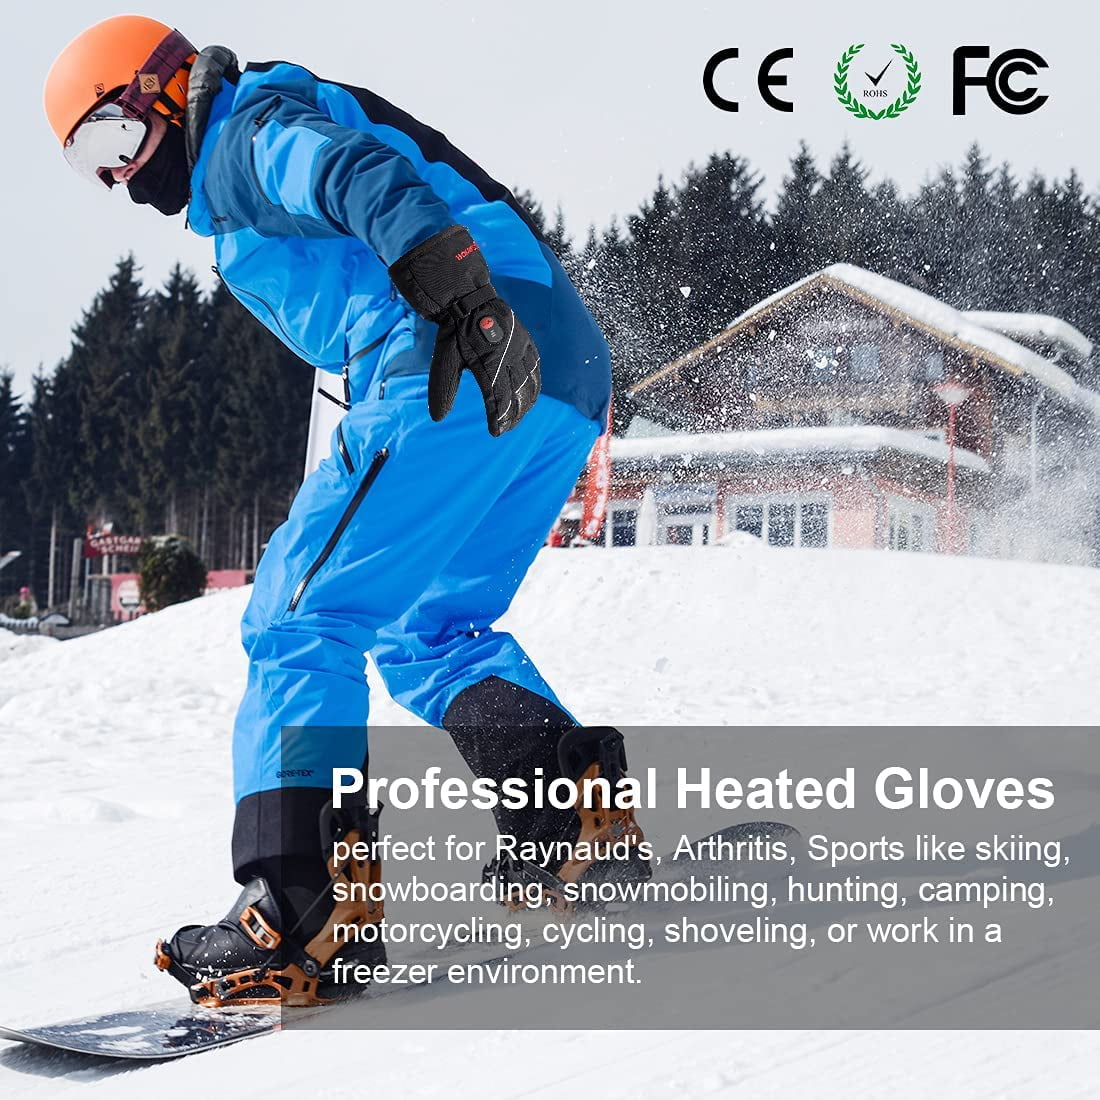 Heated Mittens Gloves for Women Men 3000mAh Electric Rechargeable Ski  Gloves for Winter Work Skiing Snowboarding Fishing, Gloves -  Canada